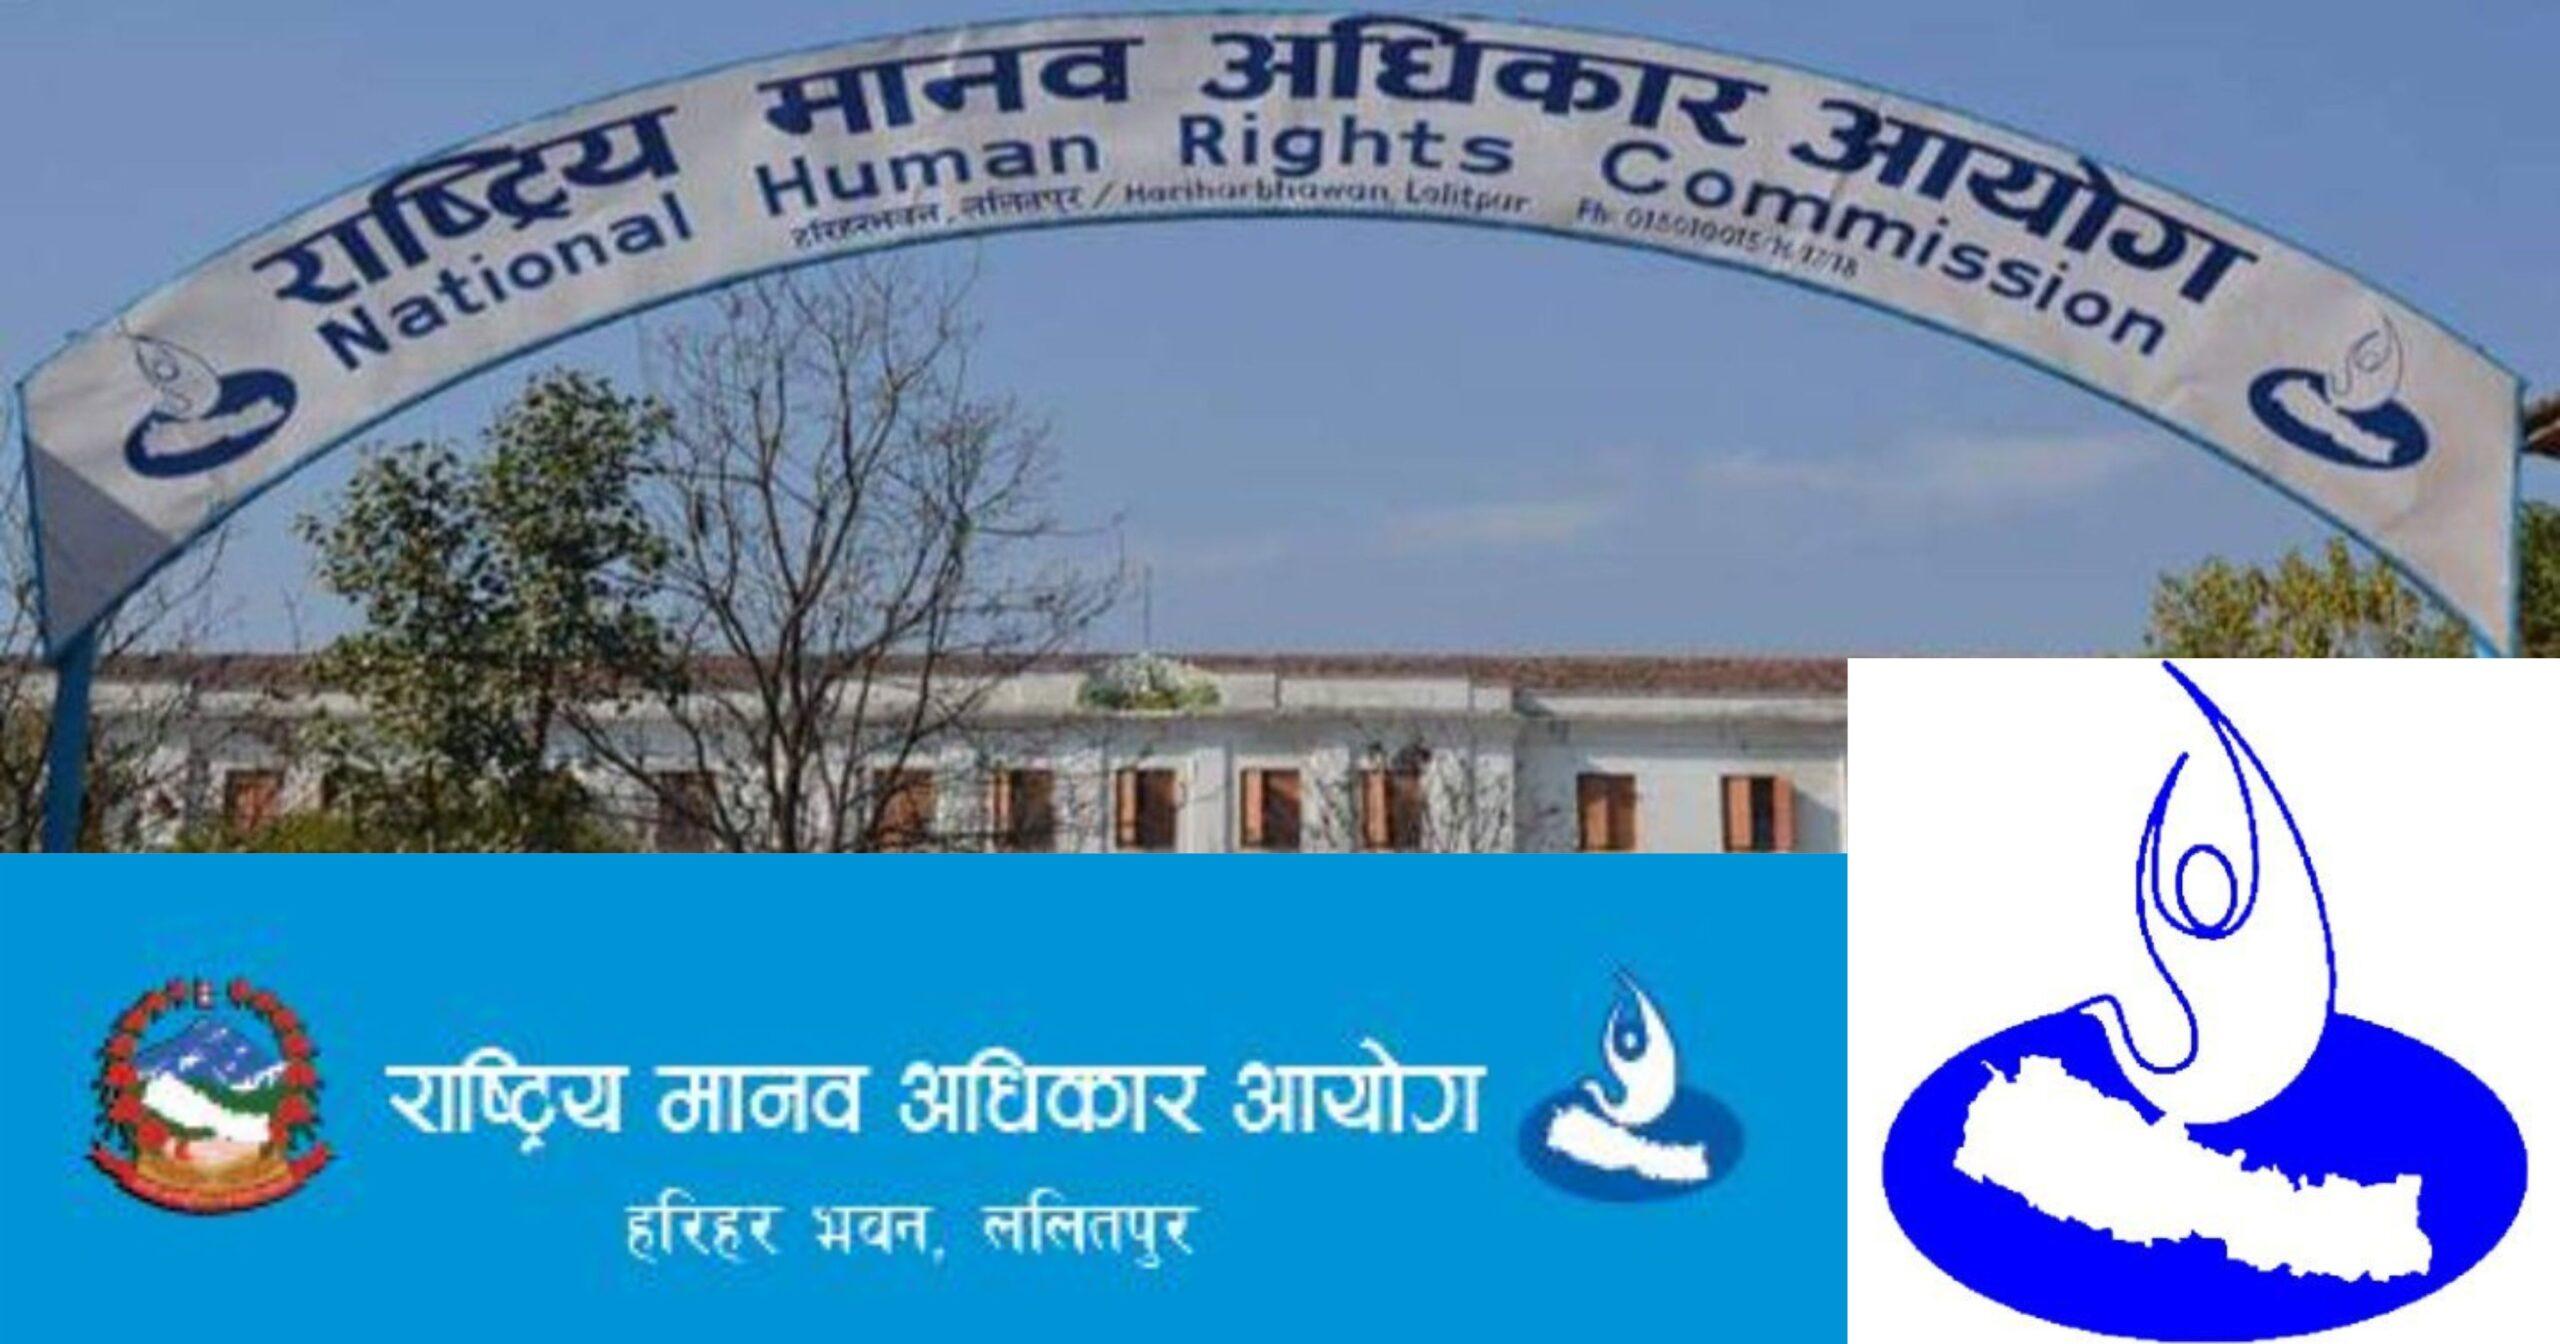 National Human Rights Commission of Nepal